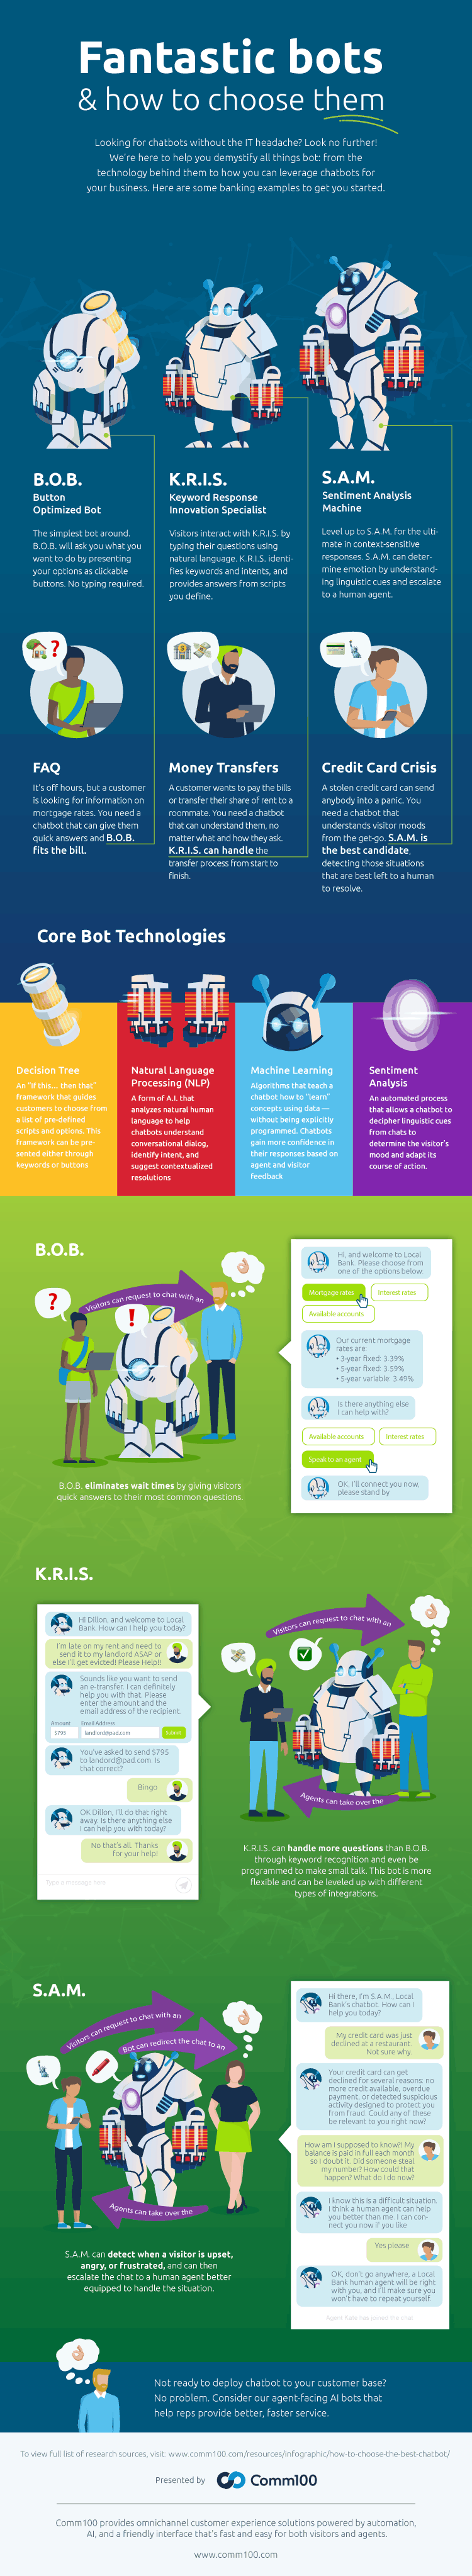 Infographic - Fantastic bots and how to choose them